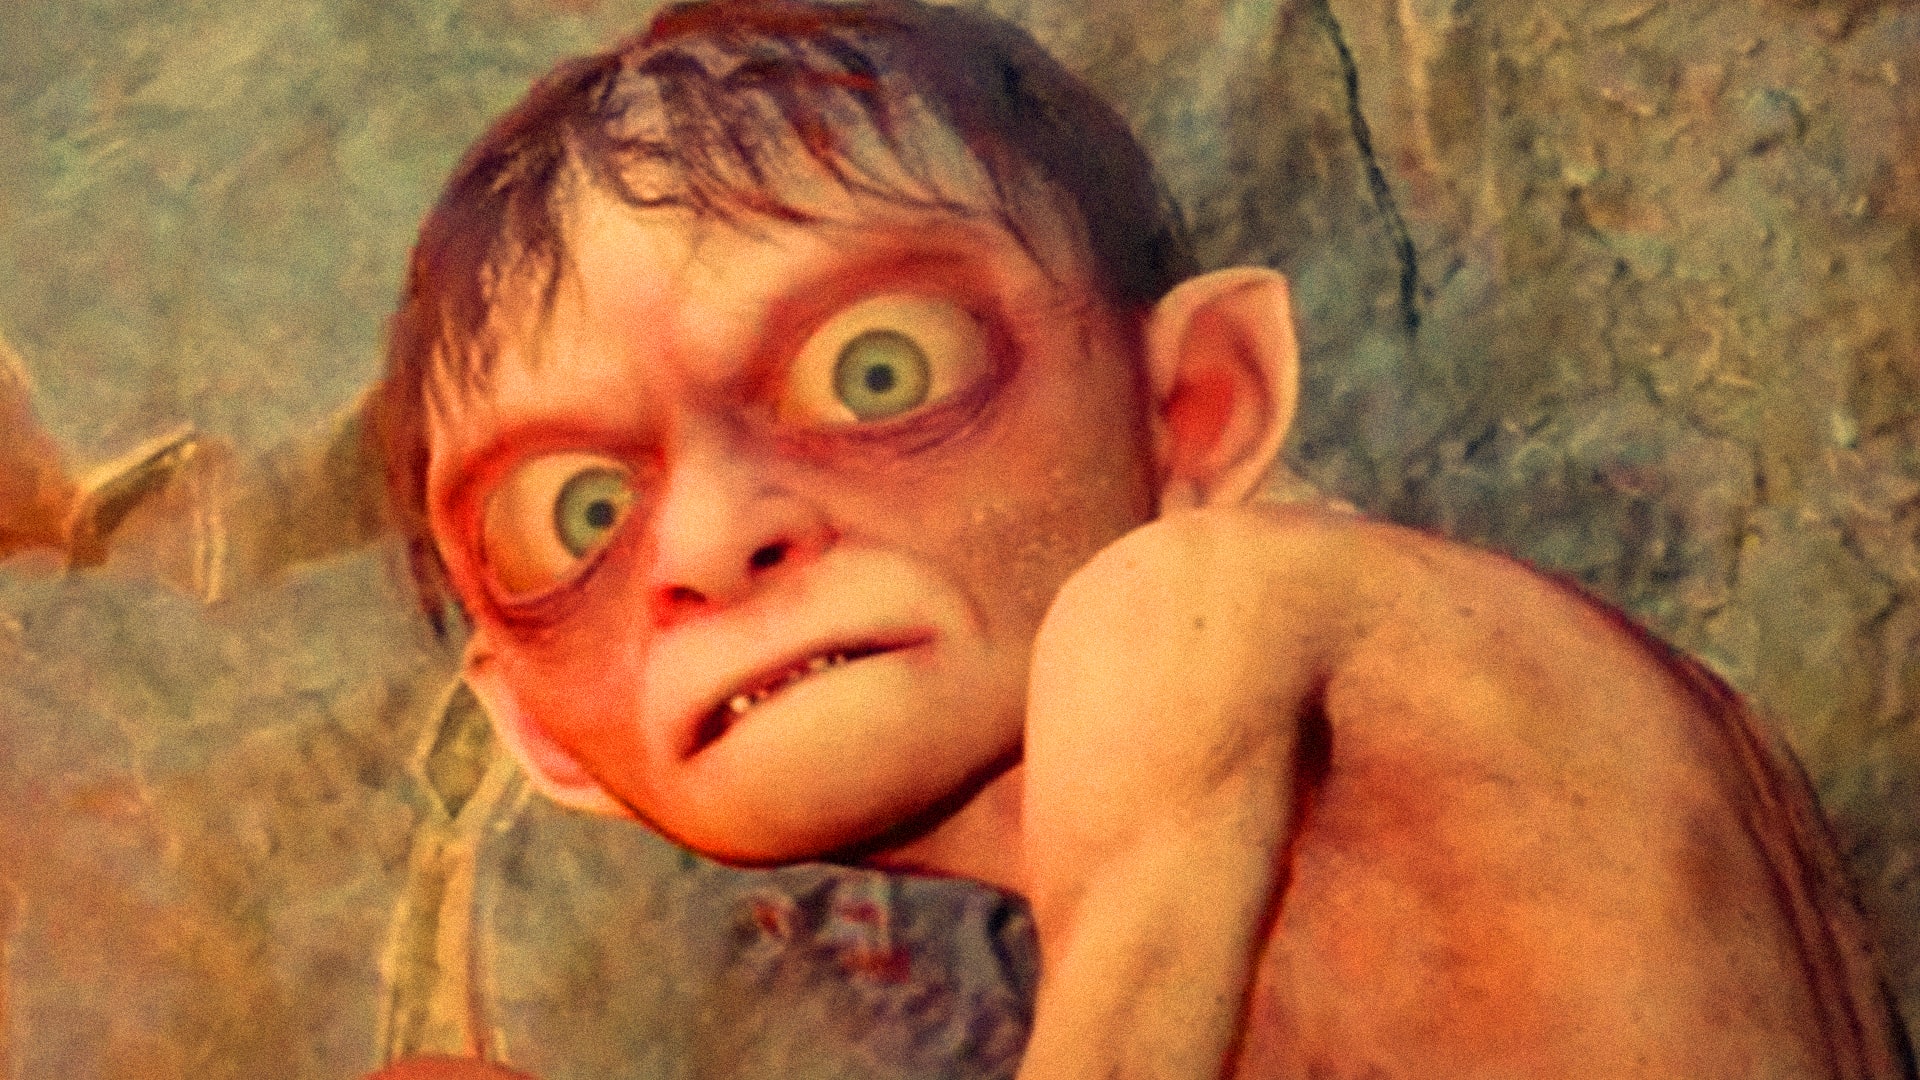 Daedalic Is Making a 'Lord of the Rings' Game About Gollum